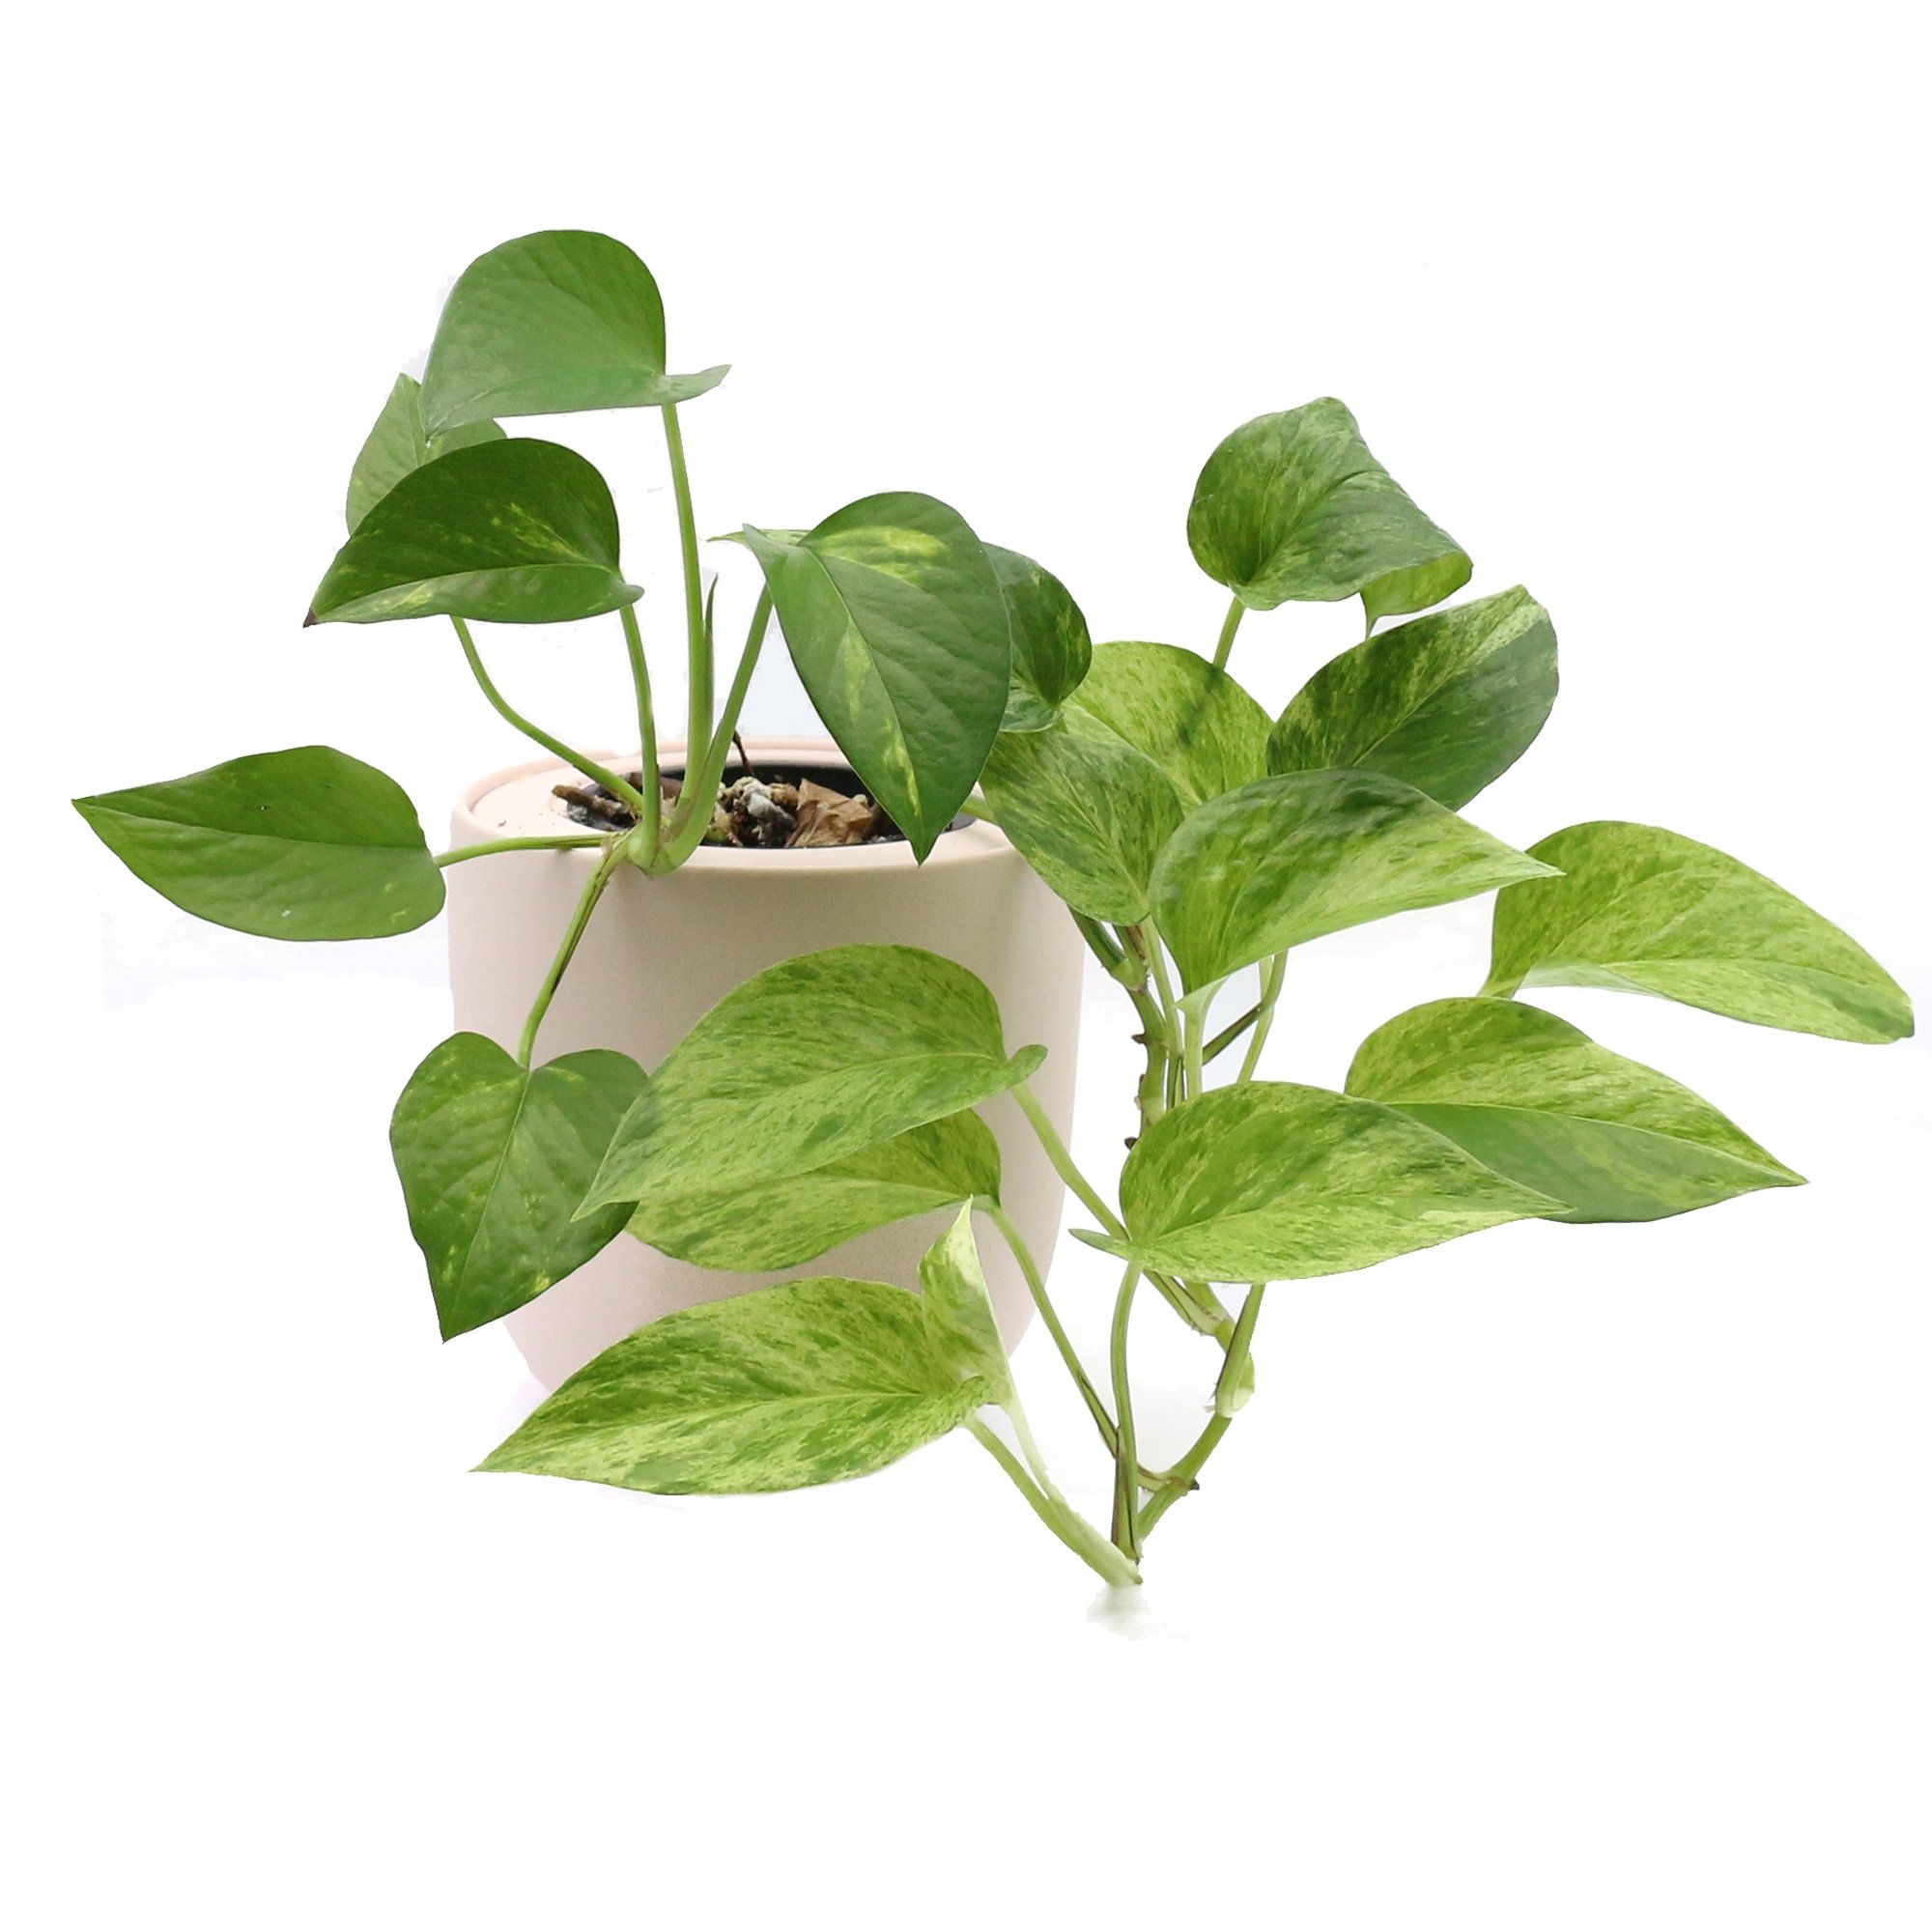 Golden Pothos Pink Ceramic Pot Hydroponic Growing Kit with Seeds